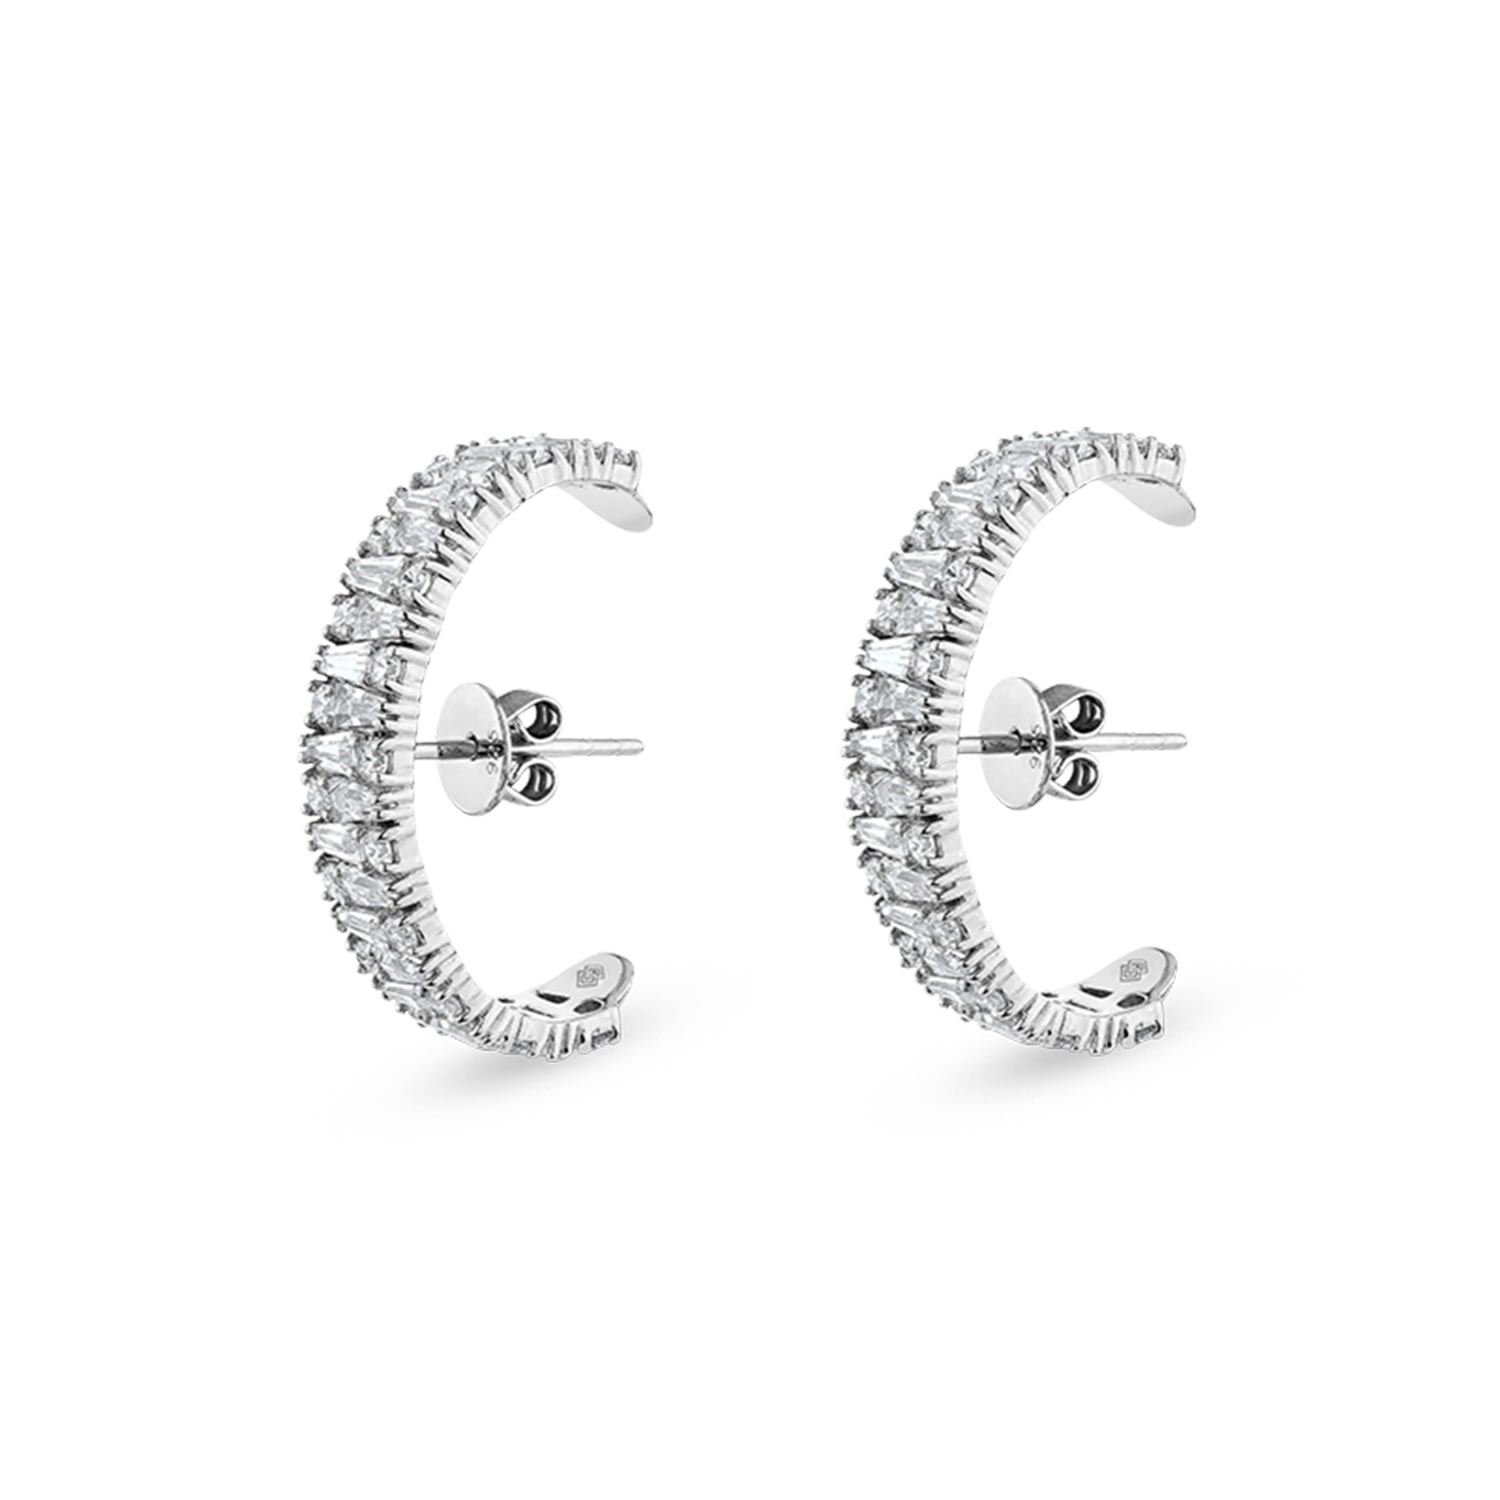 Women’s White / Silver Culture Earring With Man Made White Diamonds In Sterling Silver Sally Skoufis